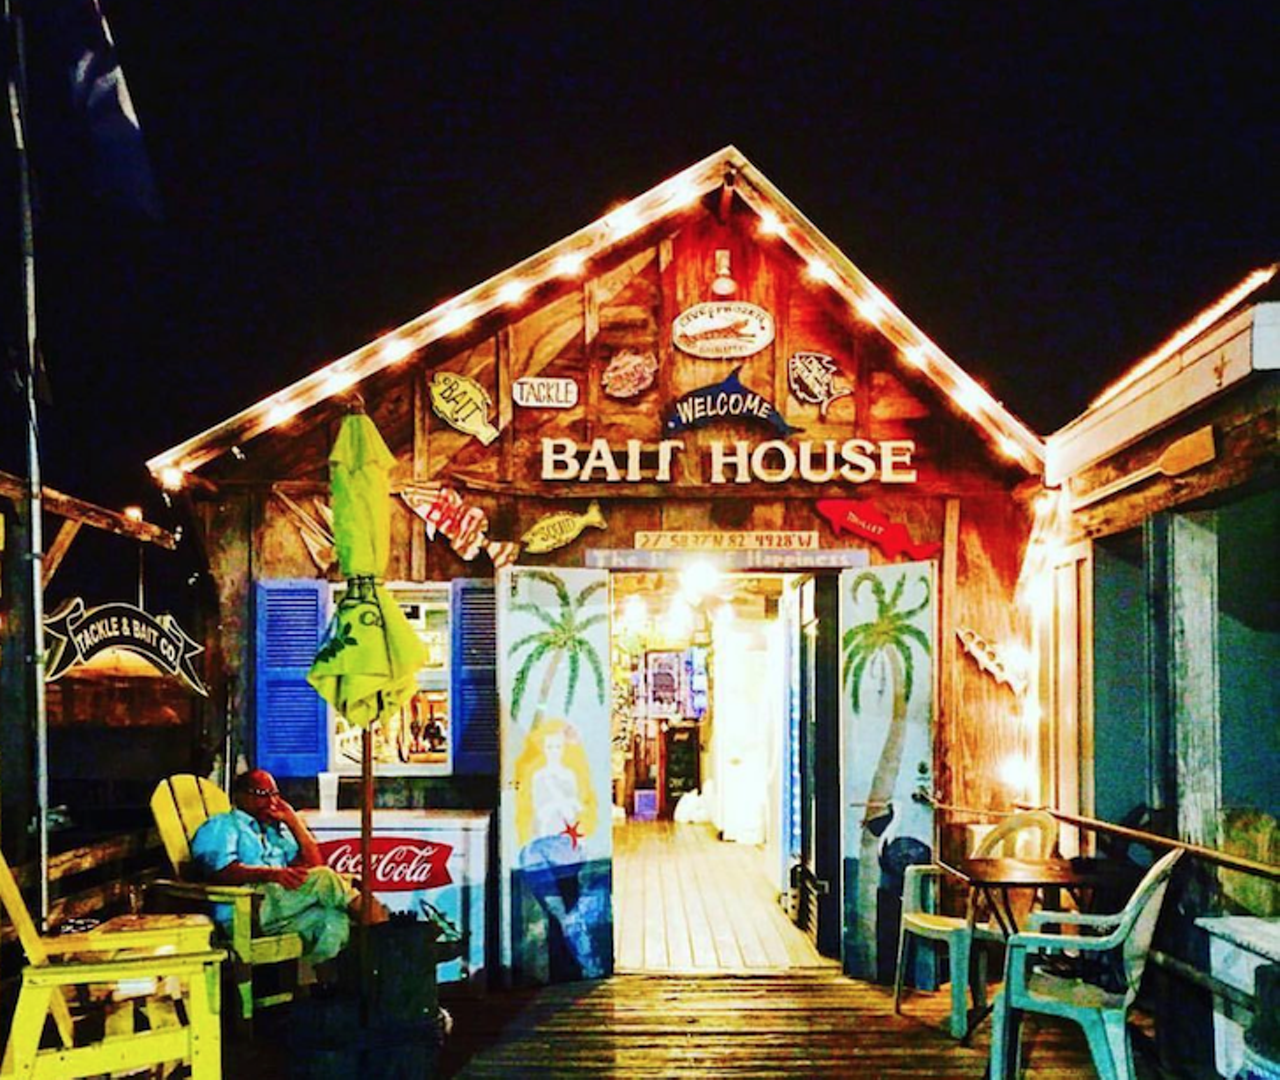 The Bait House
351 S. Gulfview Blvd., Clearwater, FL 33767, (727) 446-8134 
The Bait House&#146;s motto "You&#146;ll be hooked&#148; reigns true after you try their fresh seafood; known especially for their drunken shrimp and clams. Most would call the Bait House rustic and charming which eventually earns those characteristics after 60 years of serving the public. 
Photo via The Bait House/Instagram